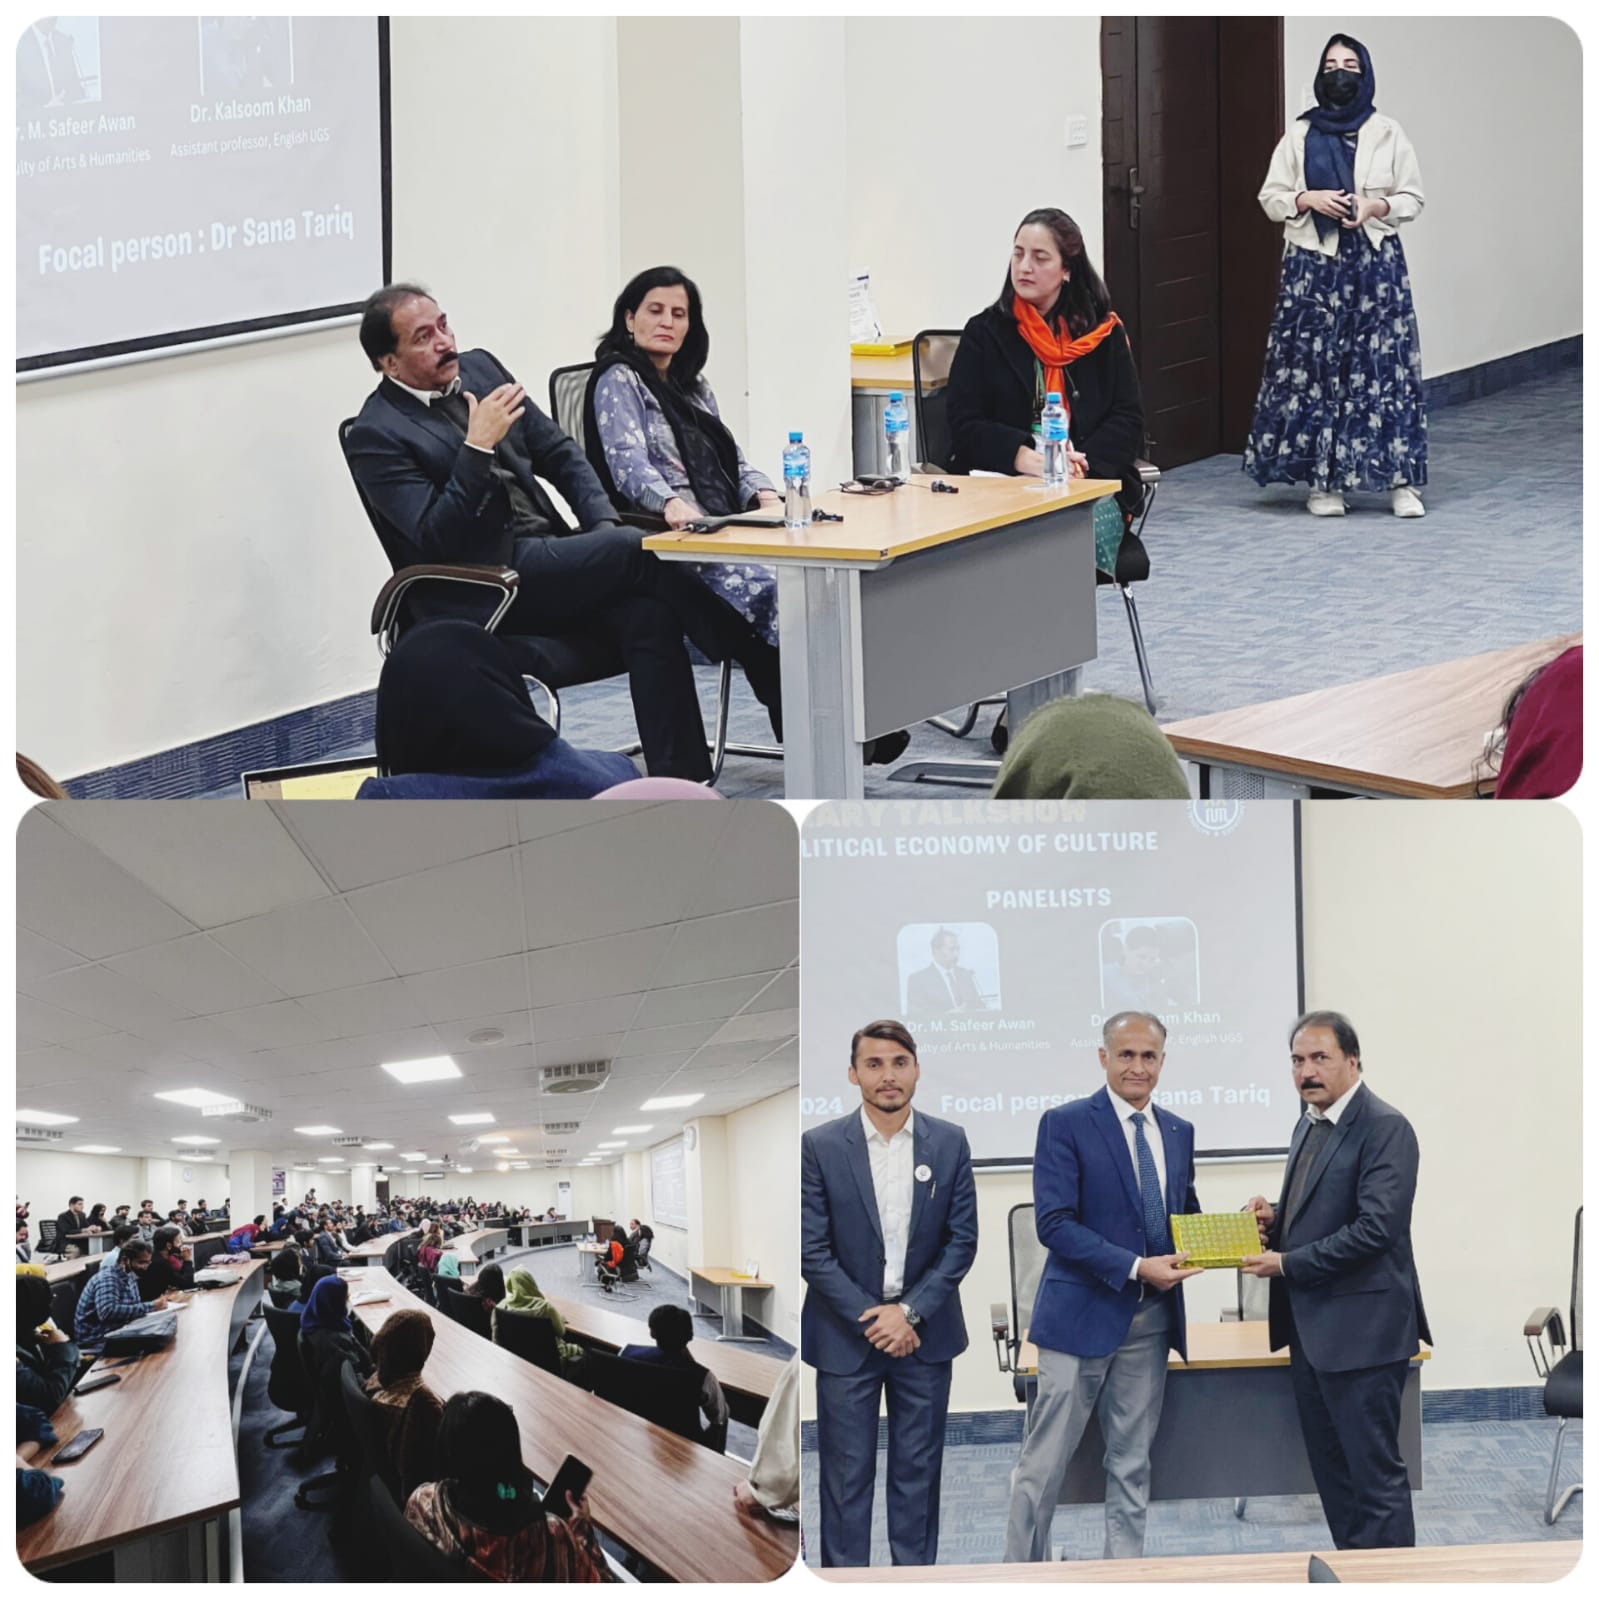 Literary Talk Show on "The Political Economy of Culture" conducted by English Literary Society (ELS)